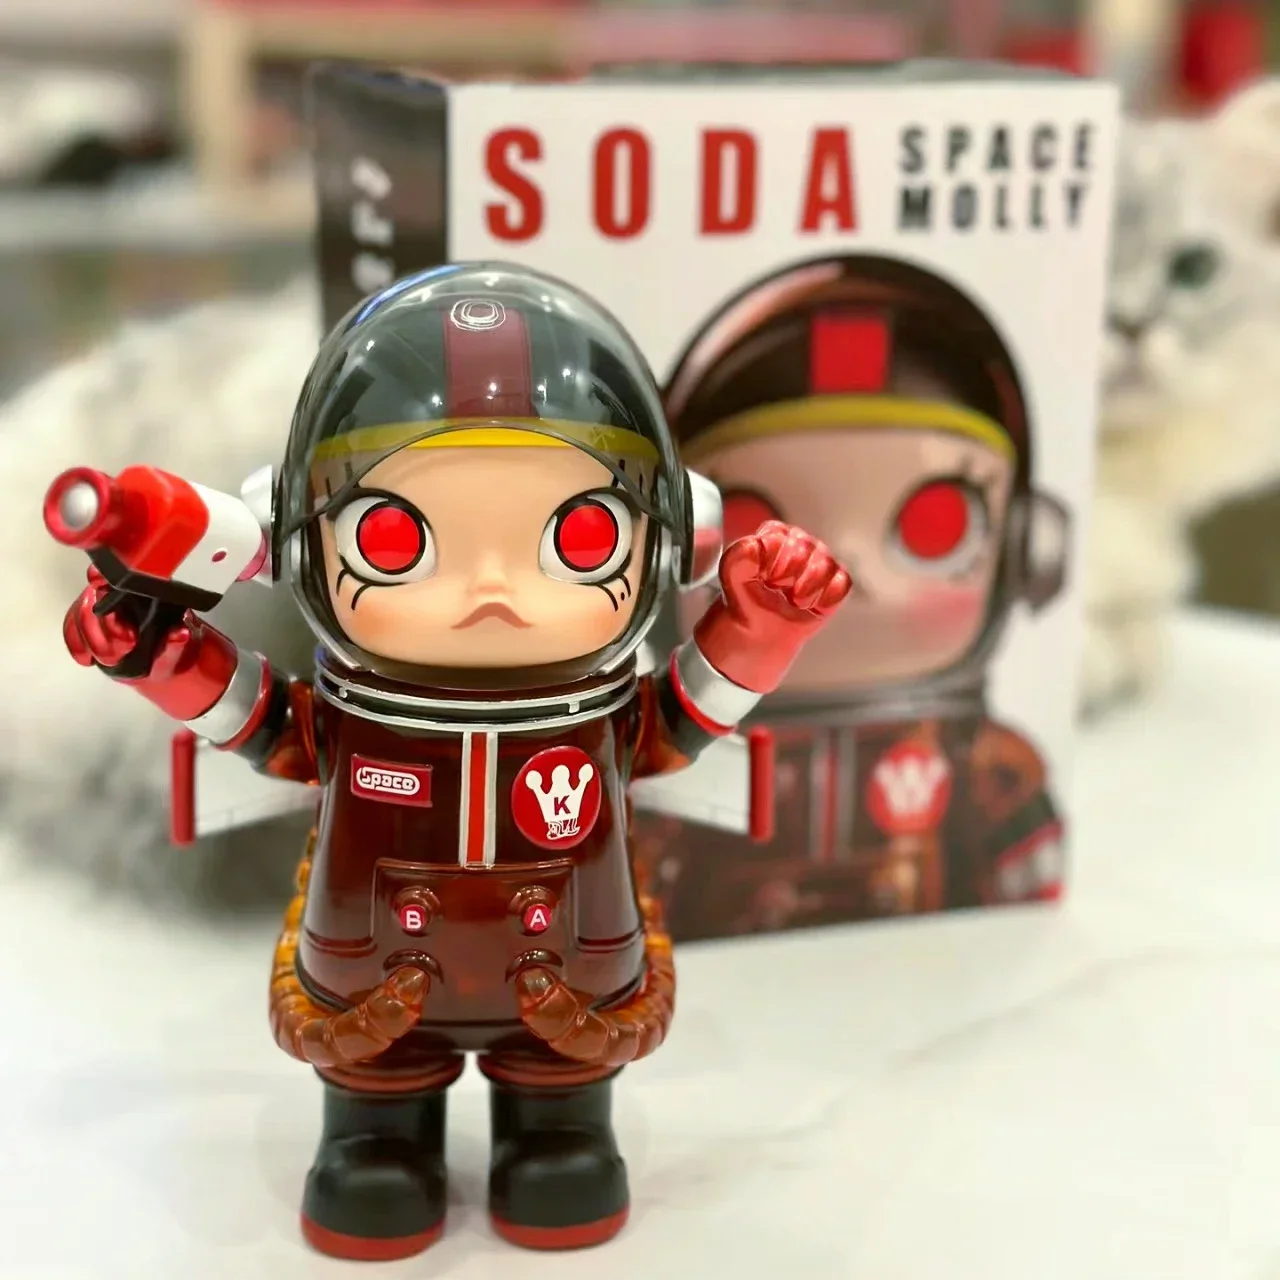 

Molly SODA Space Molly Figure Toys Red and White Doll Art Toy Special Collection Home Car Decoration